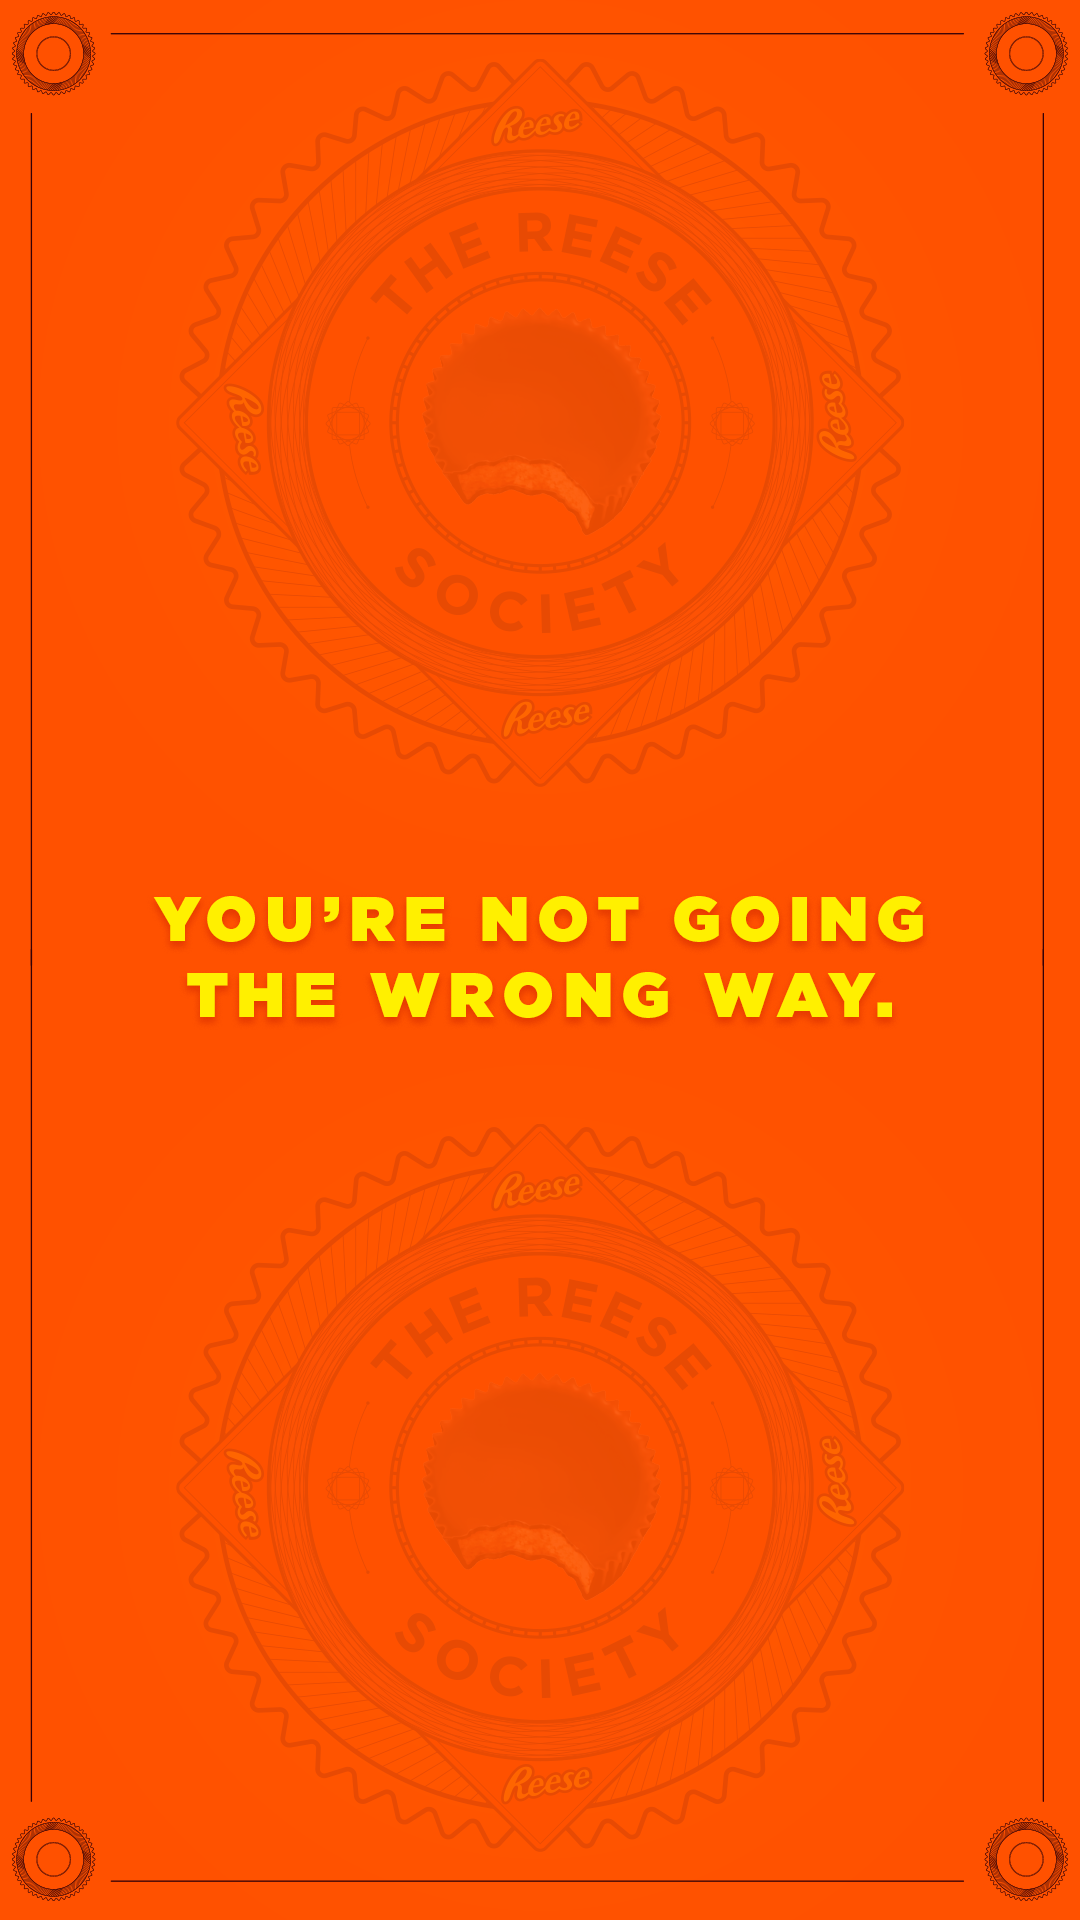 Reese-Society-IG_0087_You’re-not-going-the-wrong-way.png